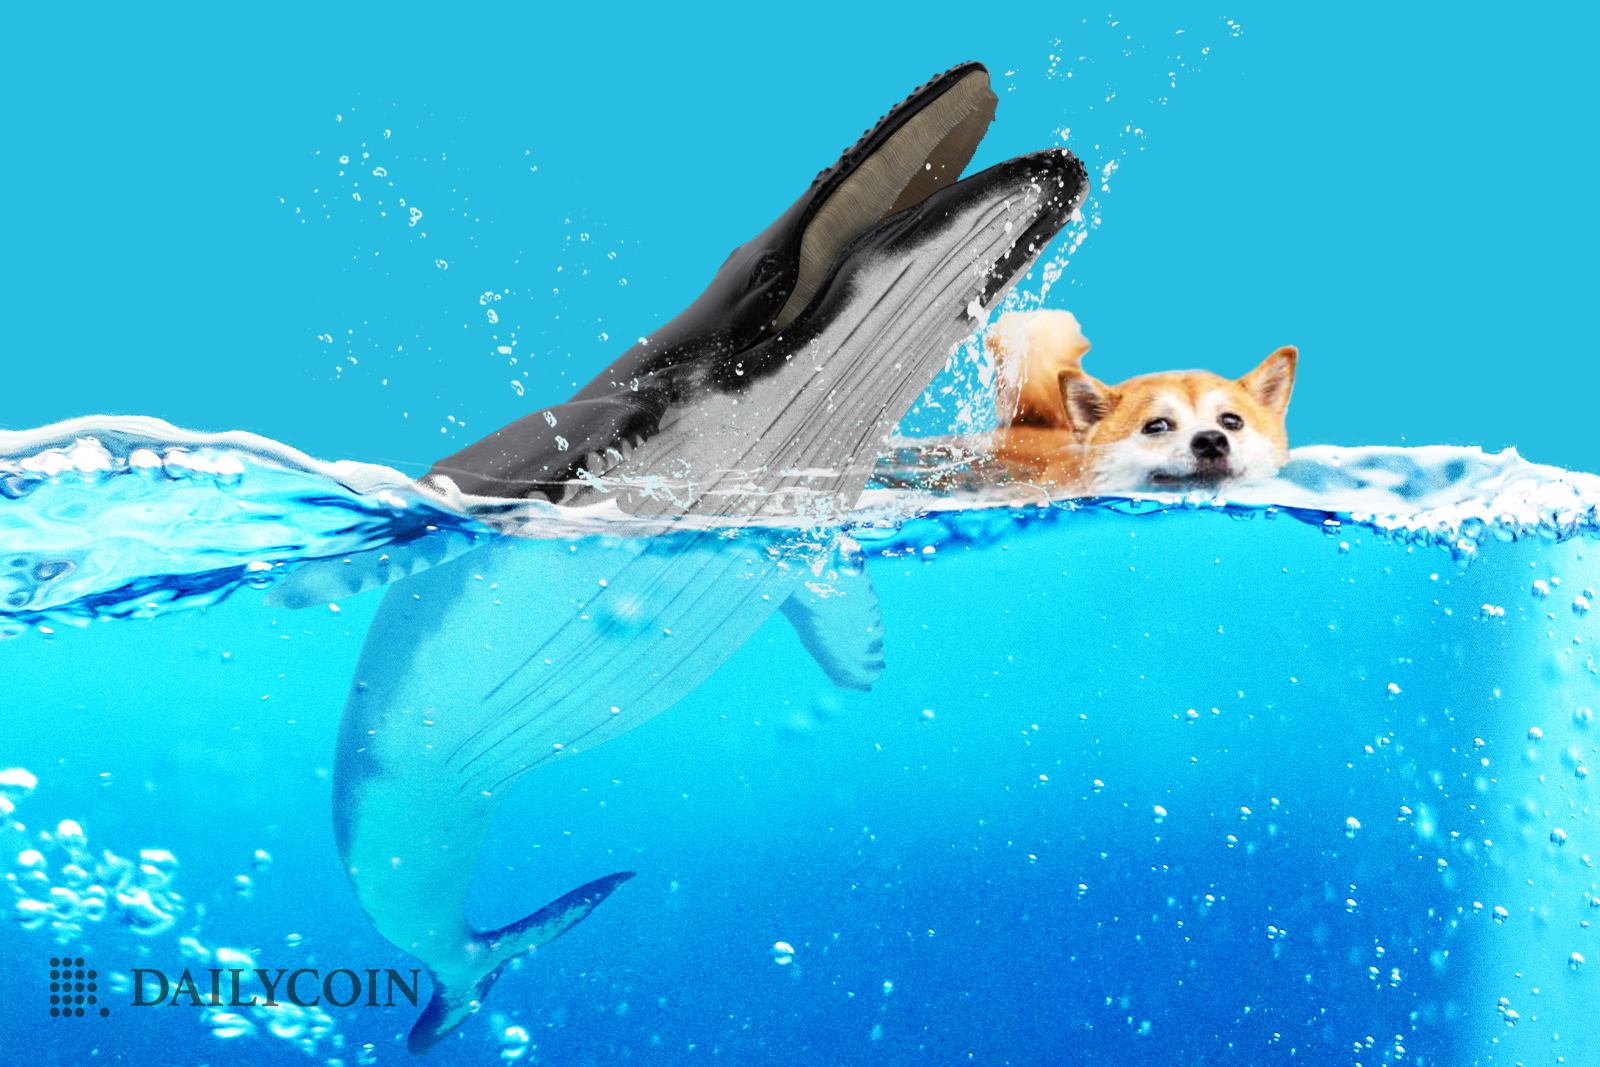 A whale splashing in the crystal clear water, trying to catch the swimming Shiba Inu.